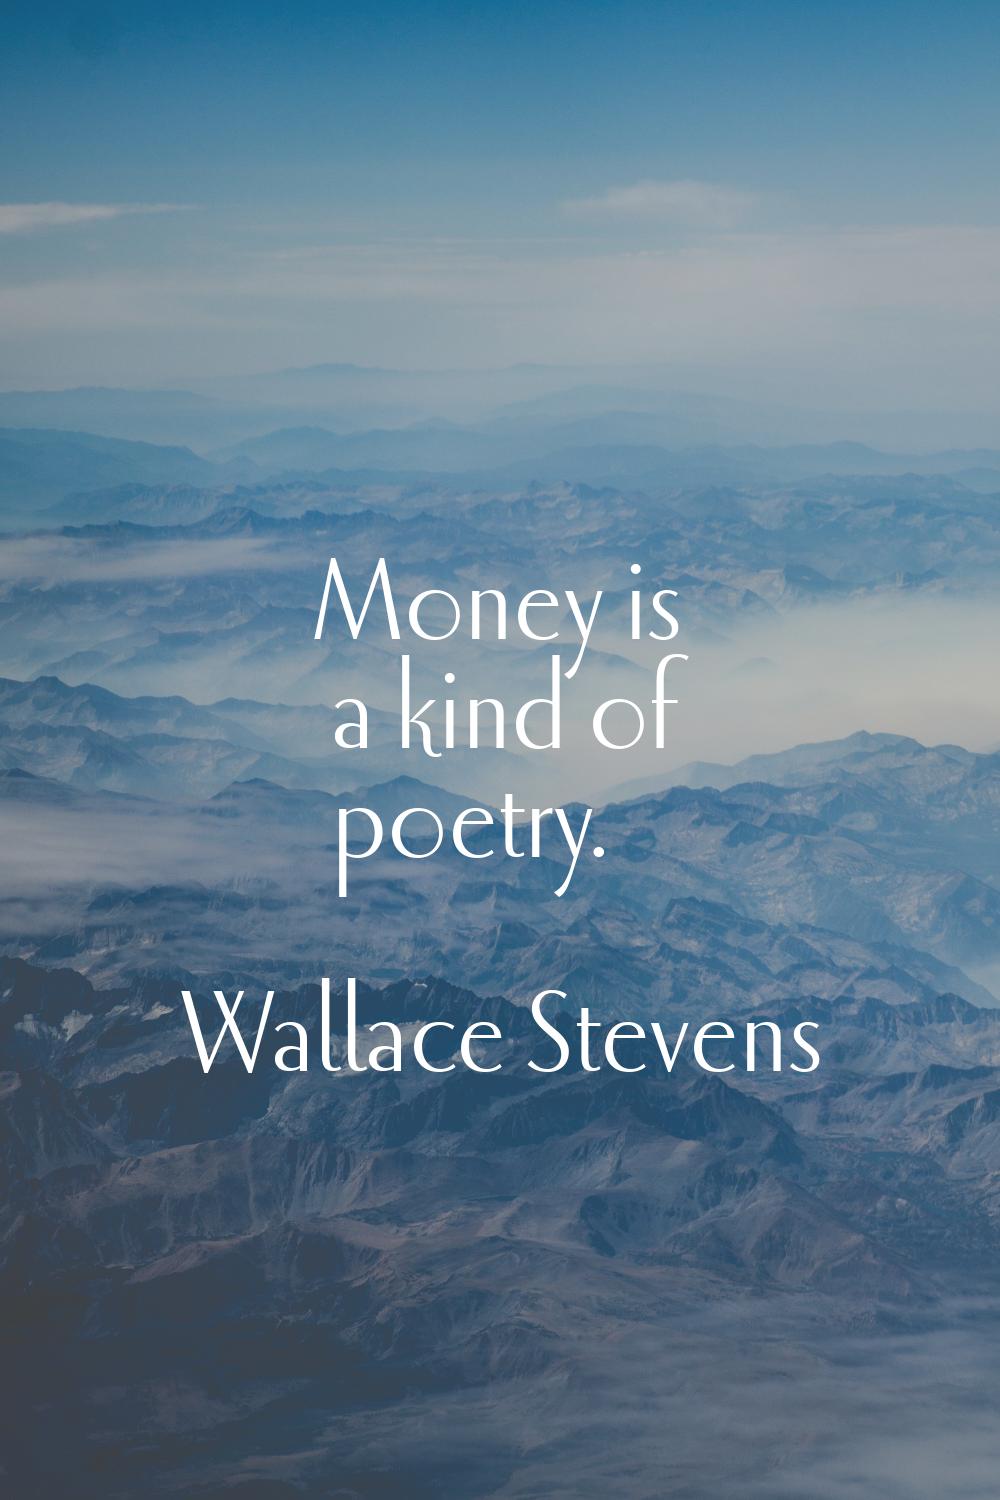 Money is a kind of poetry.